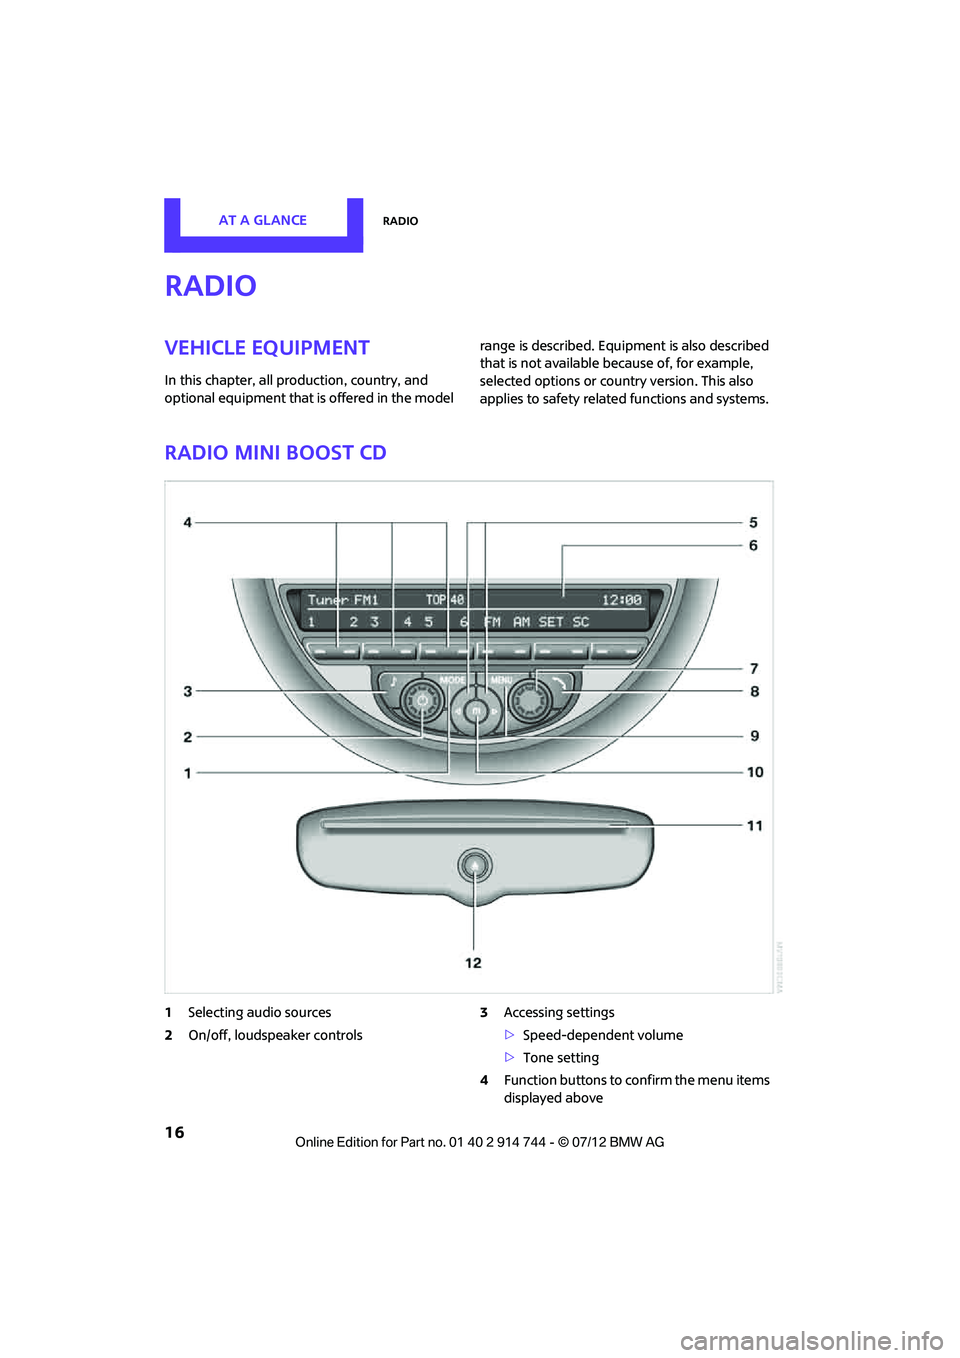 MINI COOPER 2012  Owners Manual AT A GLANCERadio
16
Radio
Vehicle equipment
In this chapter, all production, country, and 
optional equipment that is offered in the model range is described. Equi
pment is also described 
that is not